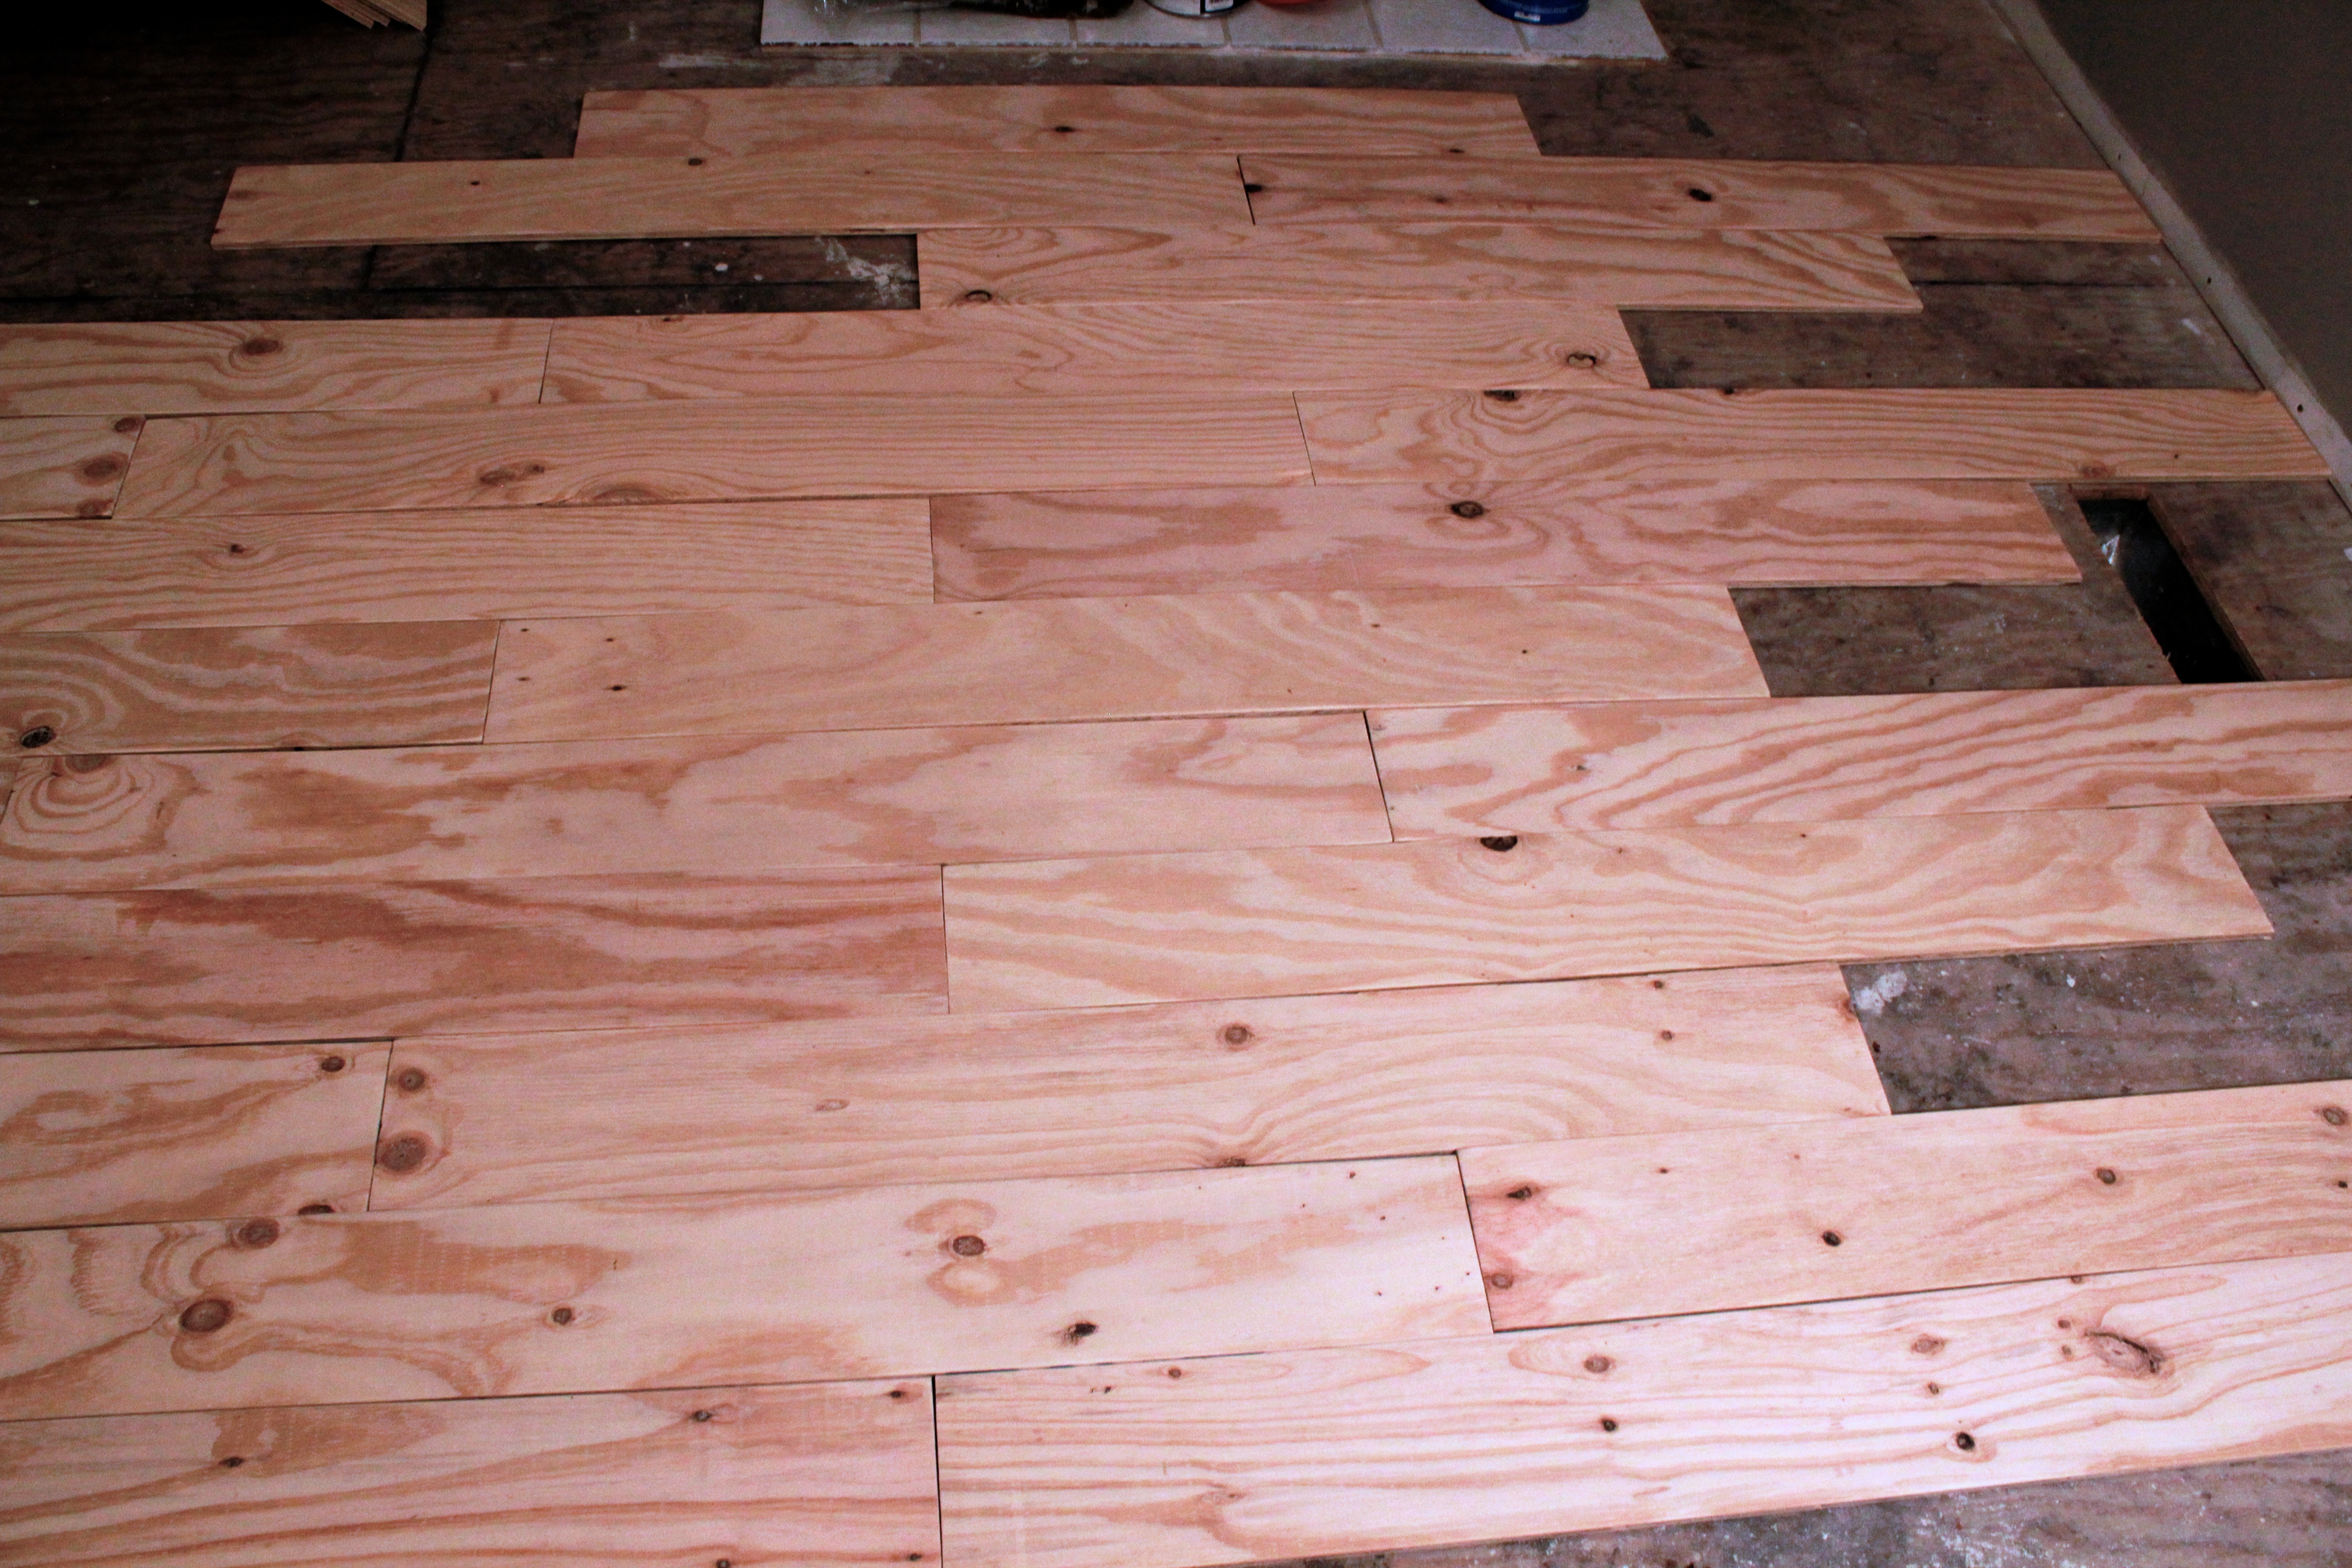 Plywood for flooring